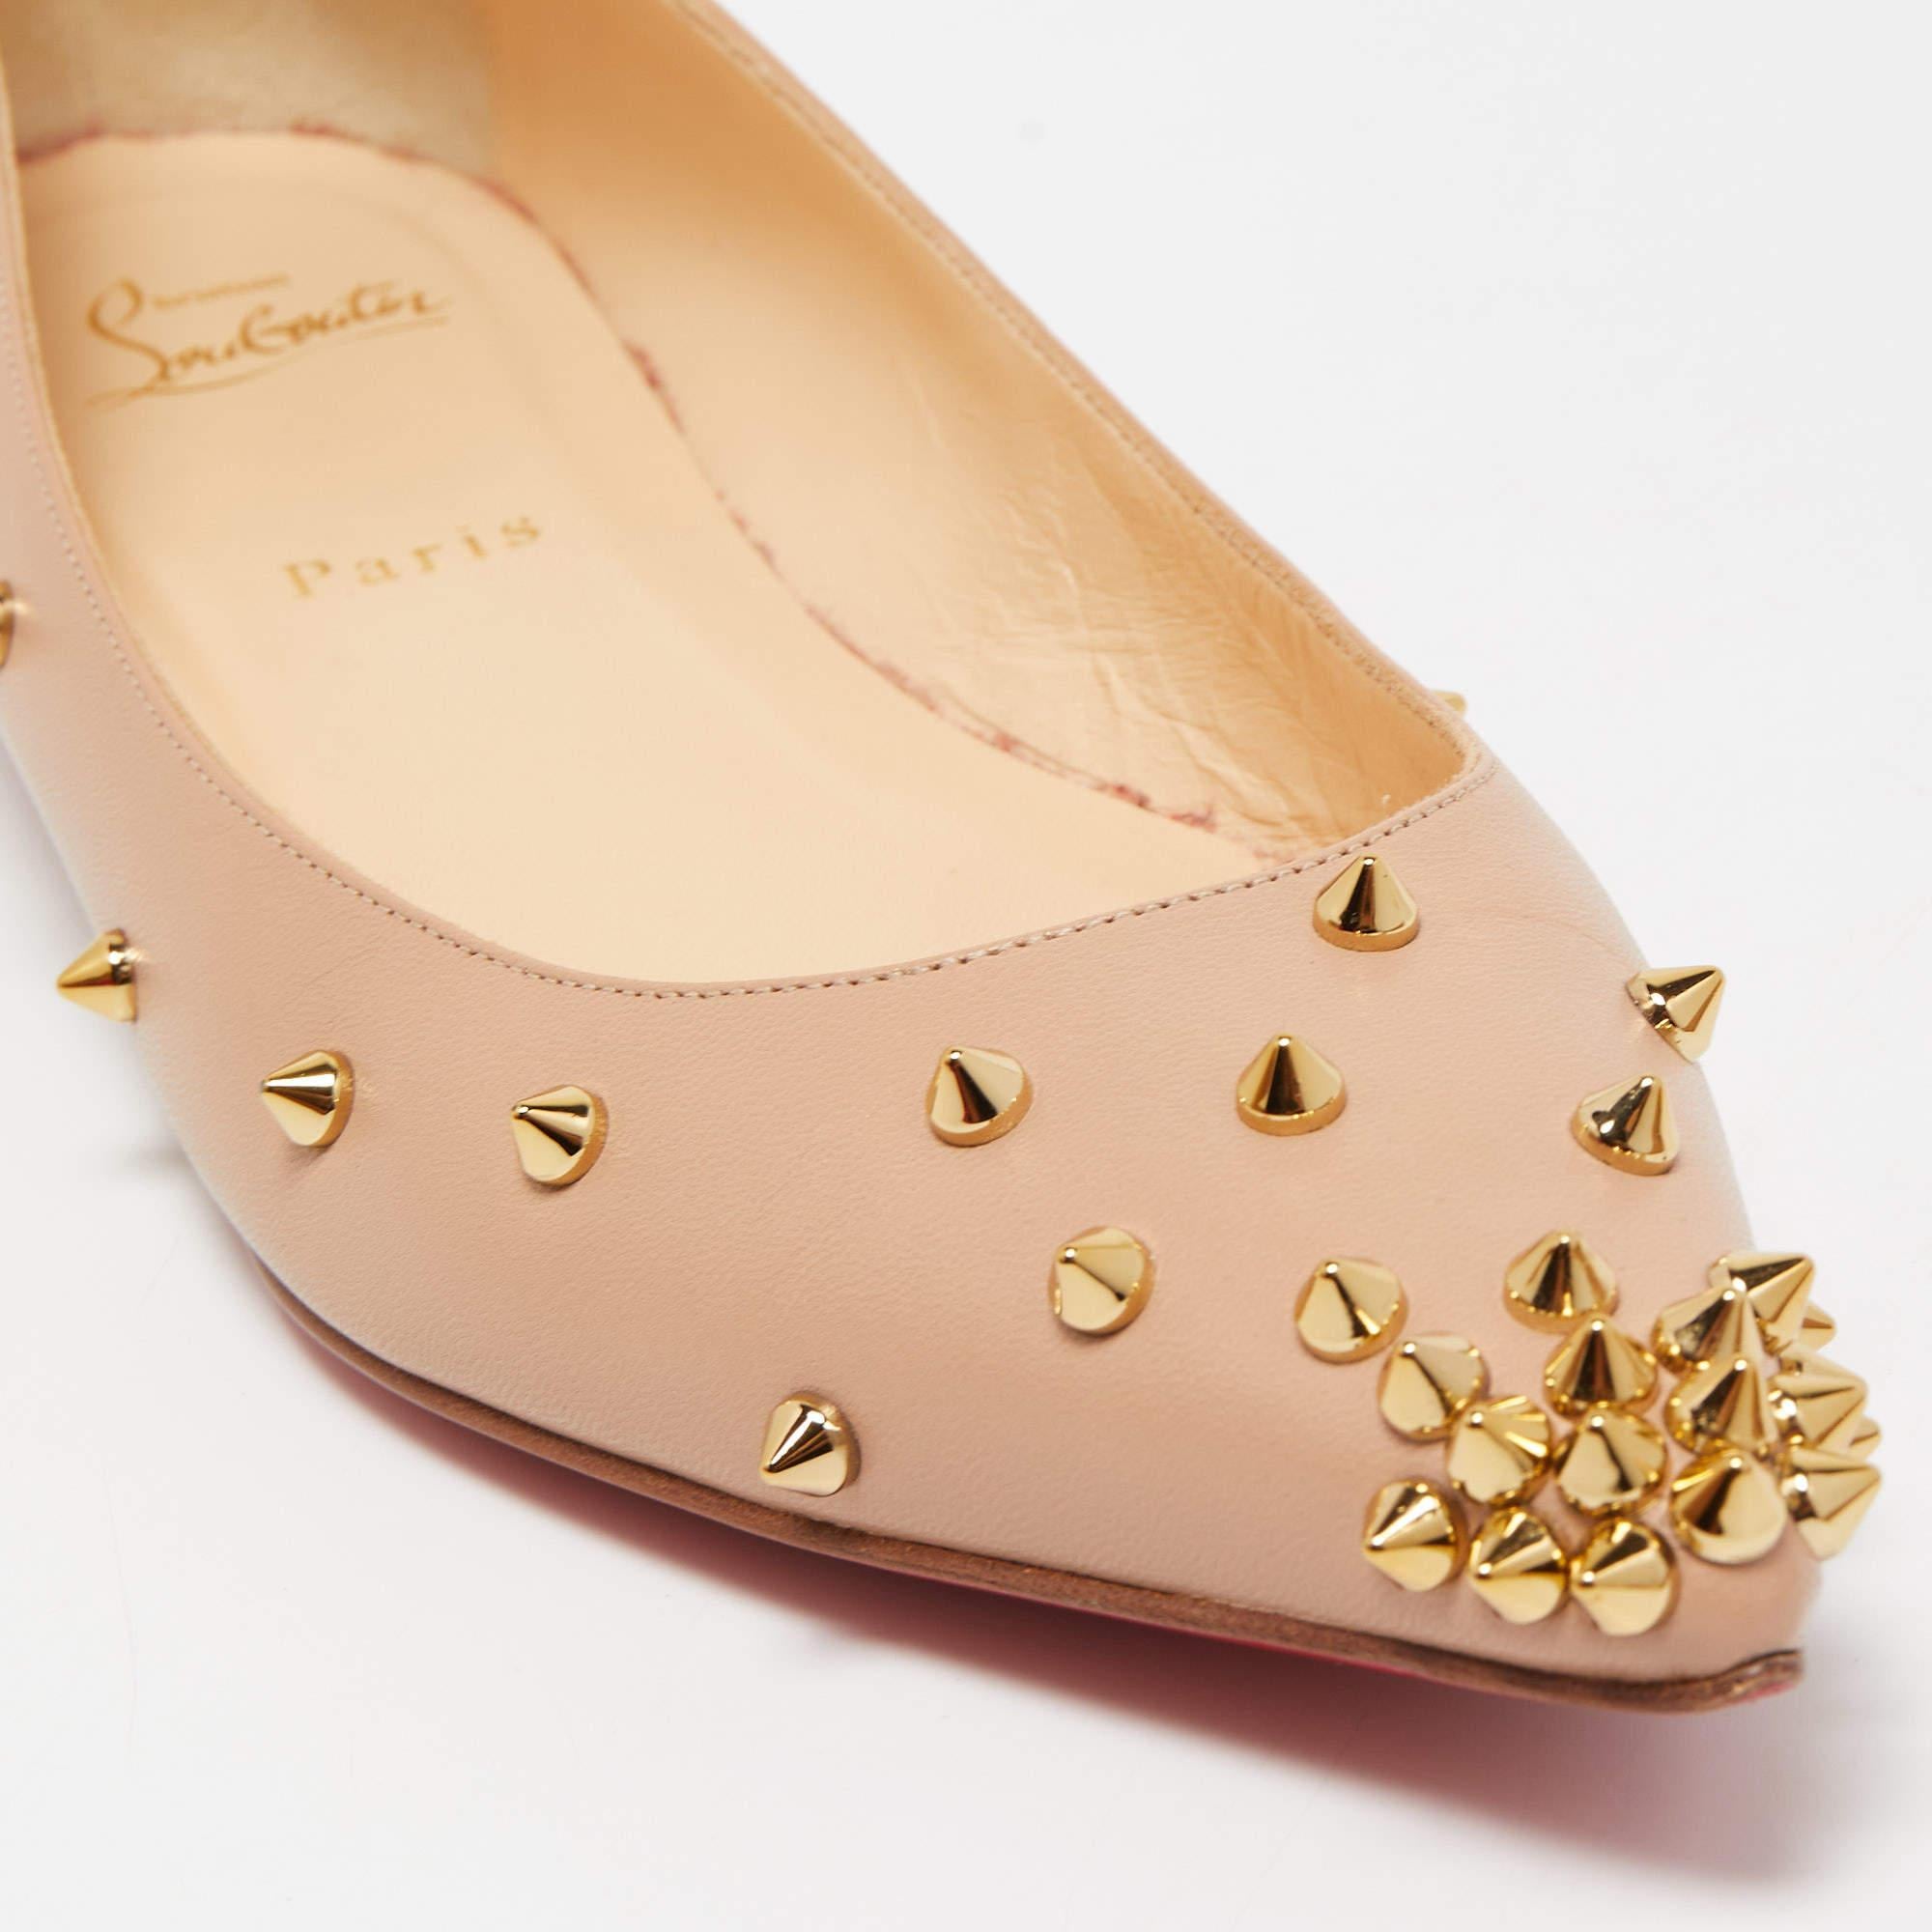 Christian Louboutin Beige Leather Degraspike Pointed Toe Ballet Flats Size 40.5 4